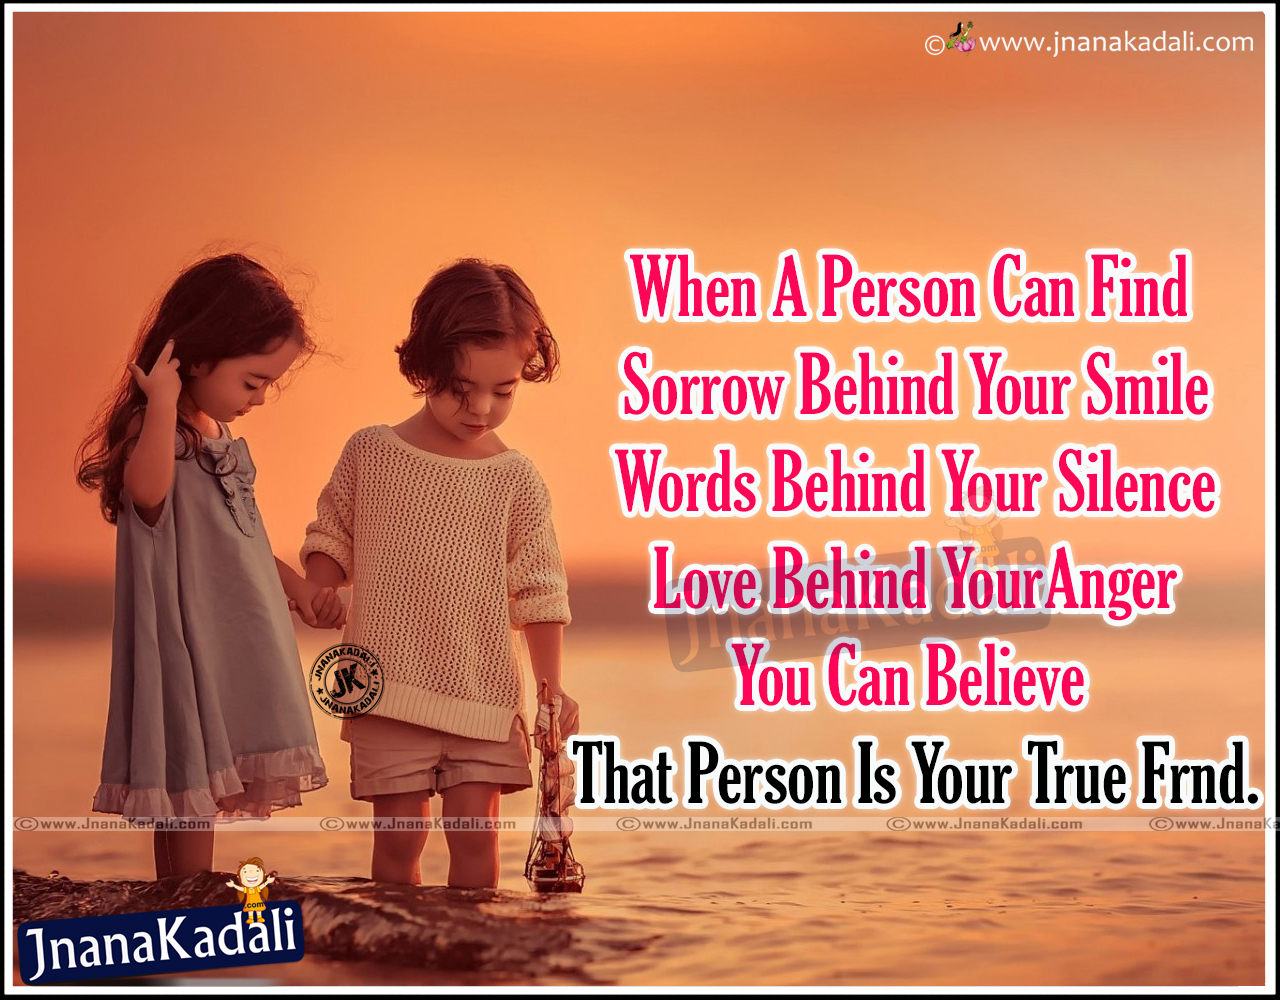 Best Telugu Friendship quotes Heart touching Friendship quotes in